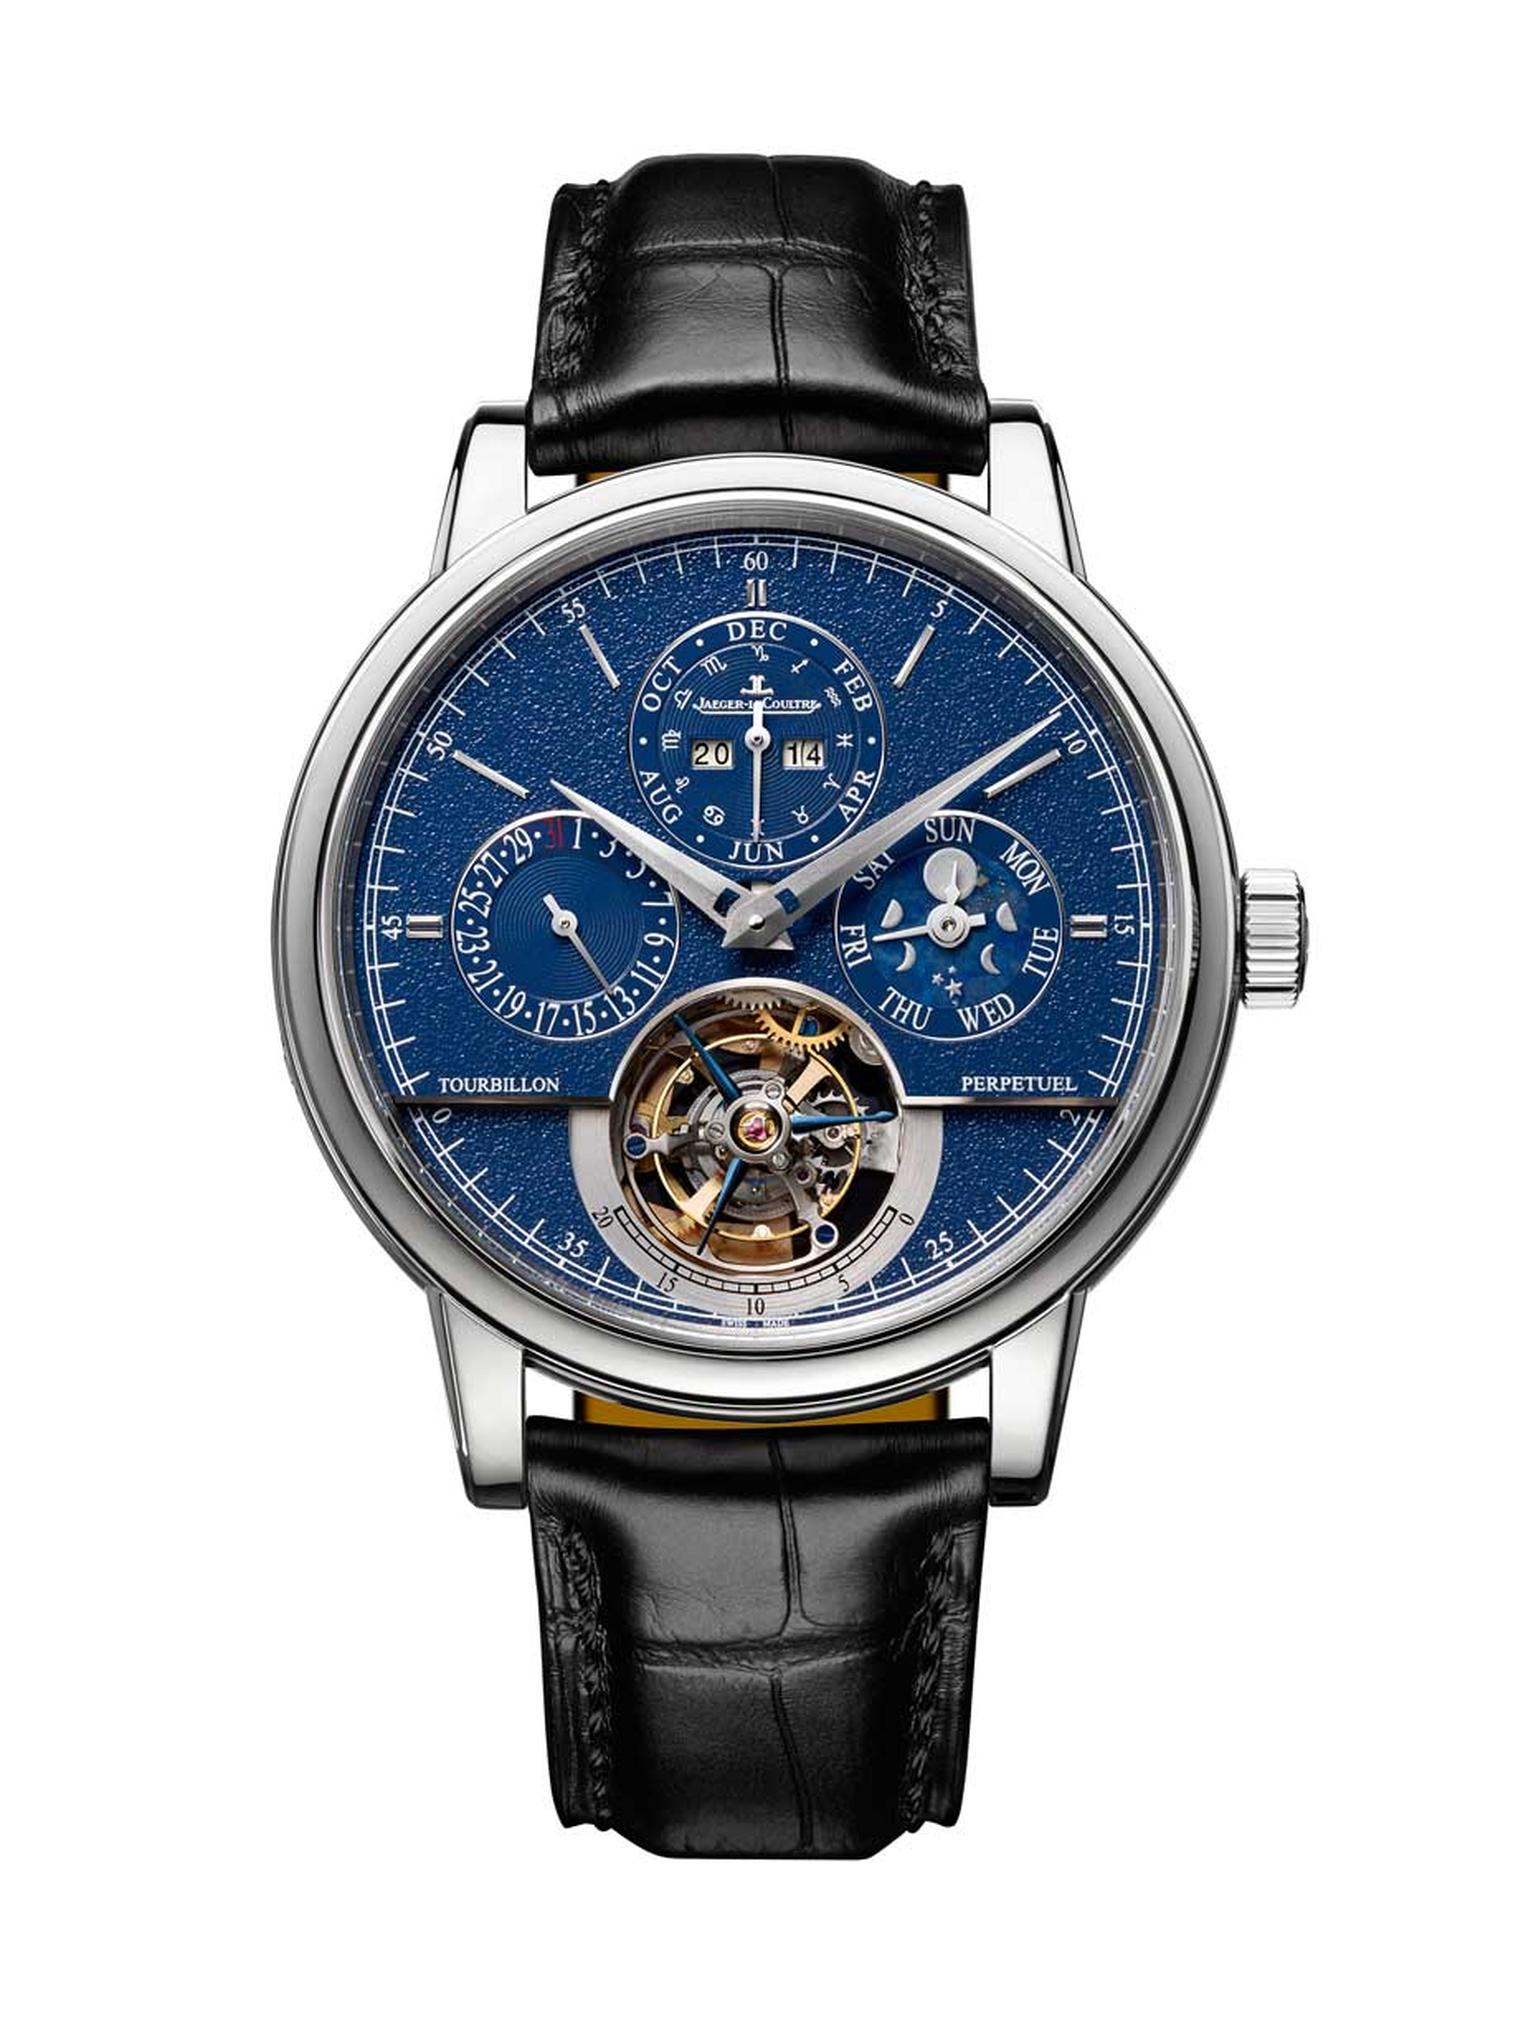 Jaeger-LeCoultre Master Grande Tradition Tourbillon Cylindrique Quantième Perpétuel watch combines the beauty of a flying tourbillon with one of the most useful complications for earthlings in the form of a perpetual calendar.